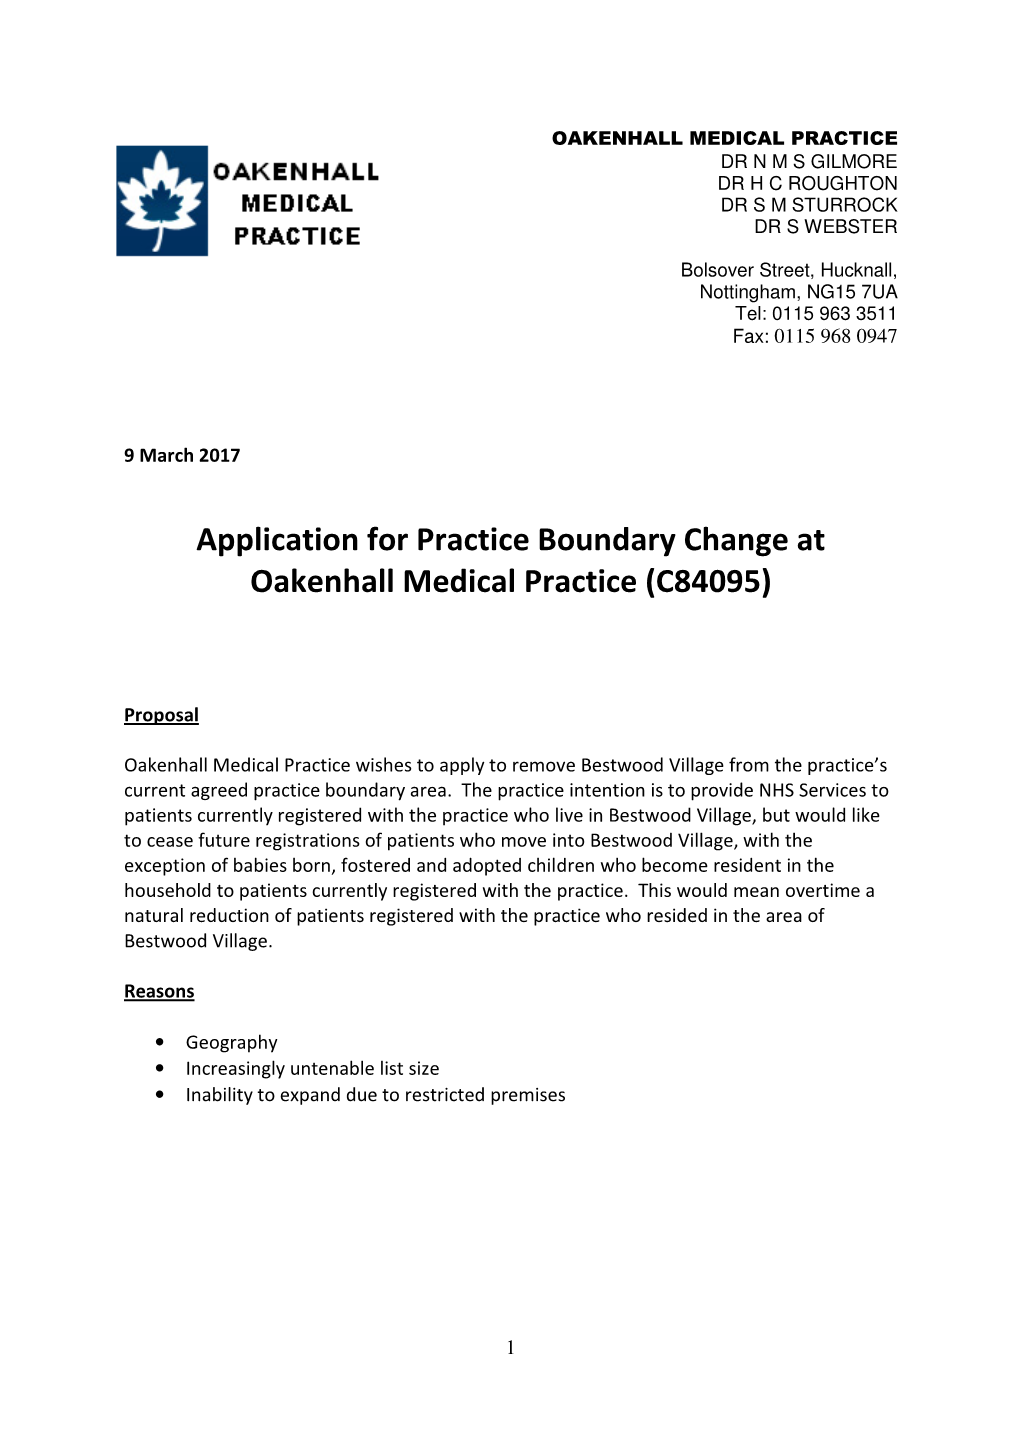 Application for Practice Boundary Change at Oakenhall Medical Practice (C84095)